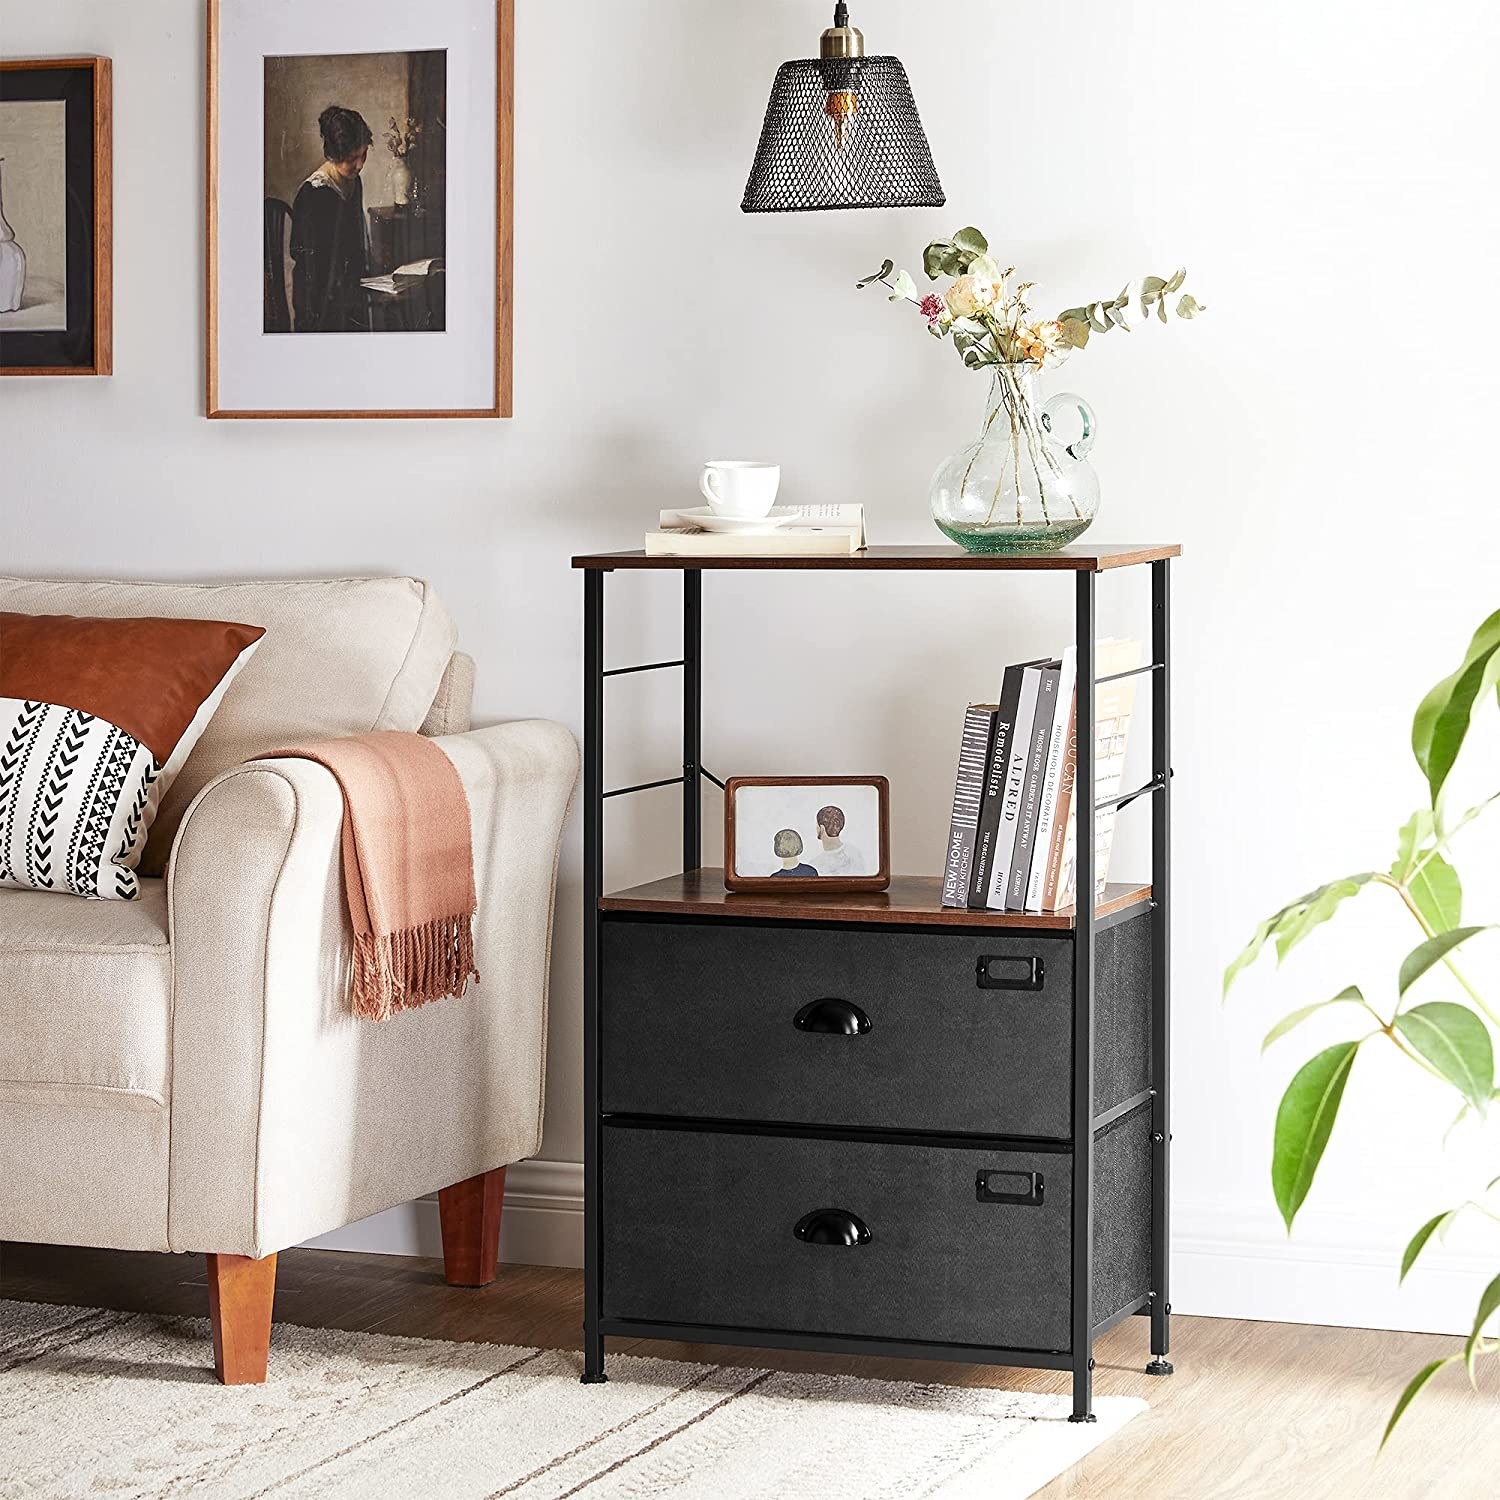 The industrial bedside table in rustic brown and black